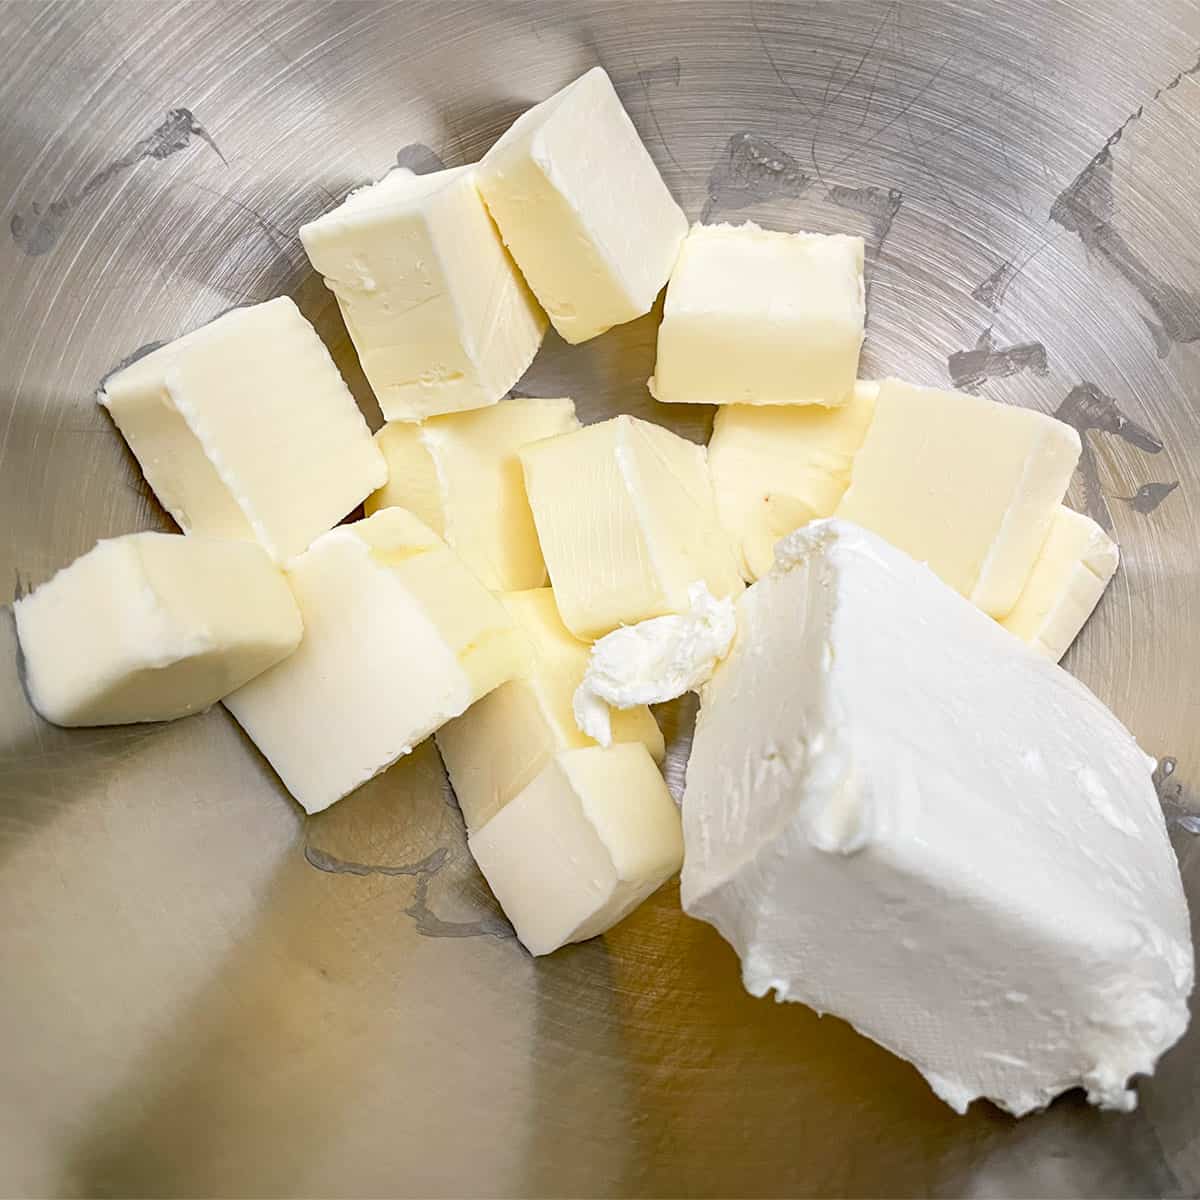 Cubed butter and a block of cream cheese ready to be mixed in a mixer bowl.